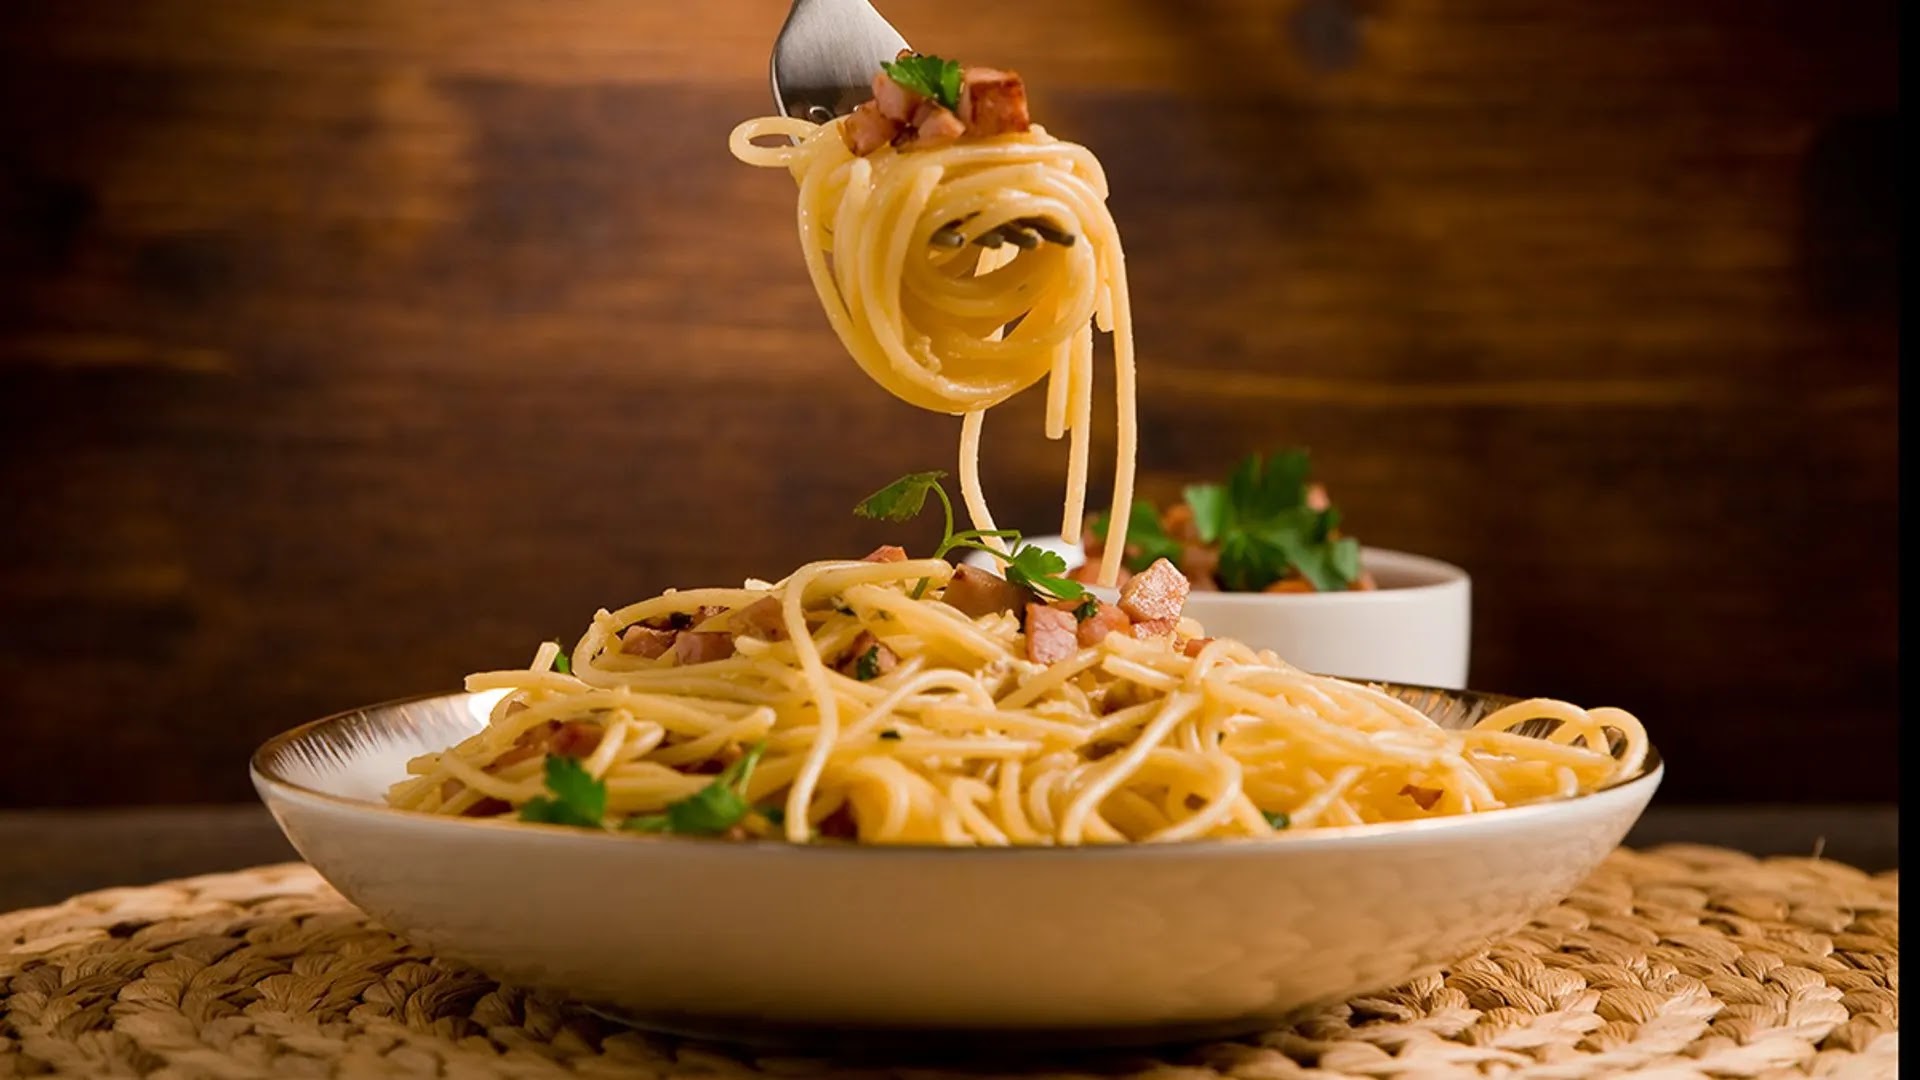 The Graceful Art of Dining: Mastering Spaghetti Etiquette in Italian Cuisine Spaghetti may be the quintessential symbol of Italian cuisine, but it's also notorious for its challenging etiquette. Dining on spaghetti can often lead to social dilemmas, particularly on dates or at formal events where the risk of a culinary faux pas is magnified. Yet, the pleasures of this beloved Italian staple should not be marred by the fear of messiness. Let's unravel the sophisticated art of eating spaghetti with poise and elegance.